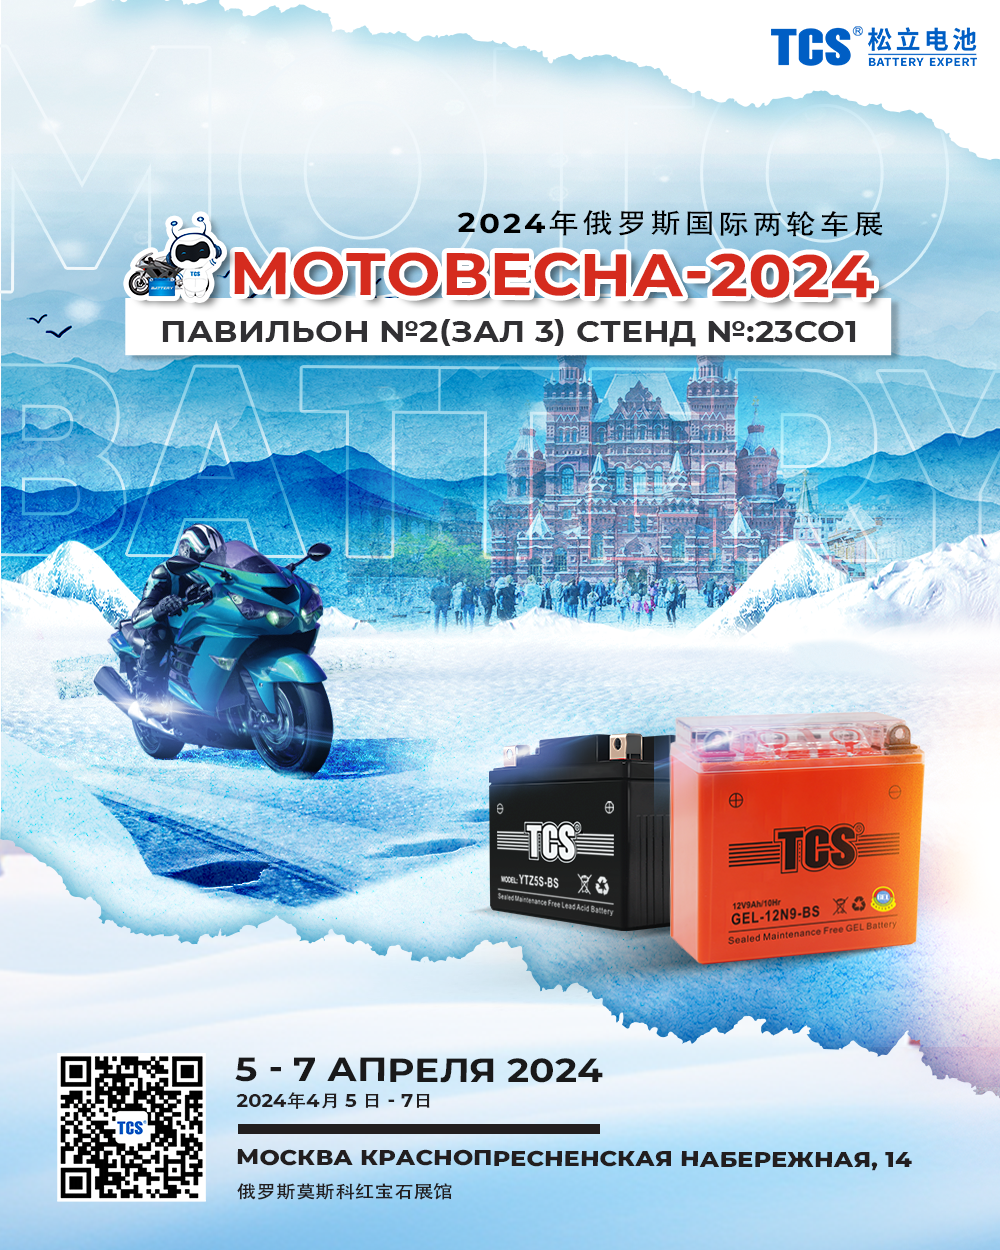 Motospring 2024 issue expo centre-Motorcycle battery